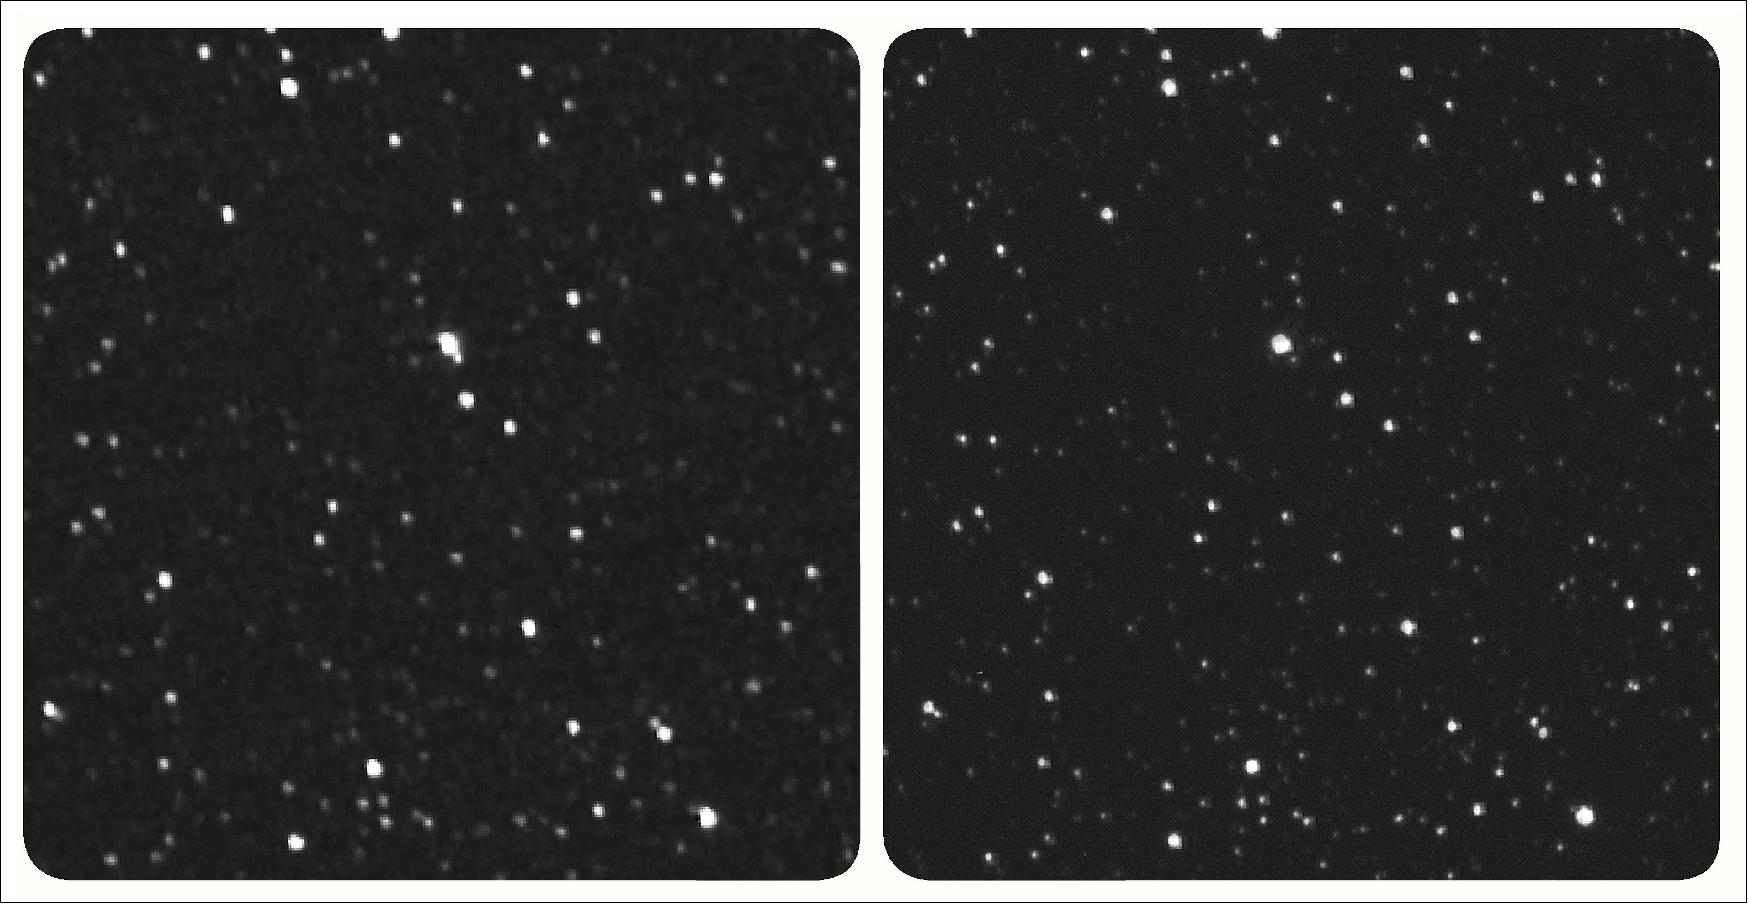 Figure 30: Parallel Stereo of Proxima Centauri: Use a stereo viewer for these images; if you don’t have a viewer, change your focus from the image by looking "through" it (and the screen) and into the distance. This creates the effect of a third image in the middle, and try setting your focus on that third image. The New Horizons image is on the left (image credit: NASA, JHU/APL, SwRI)